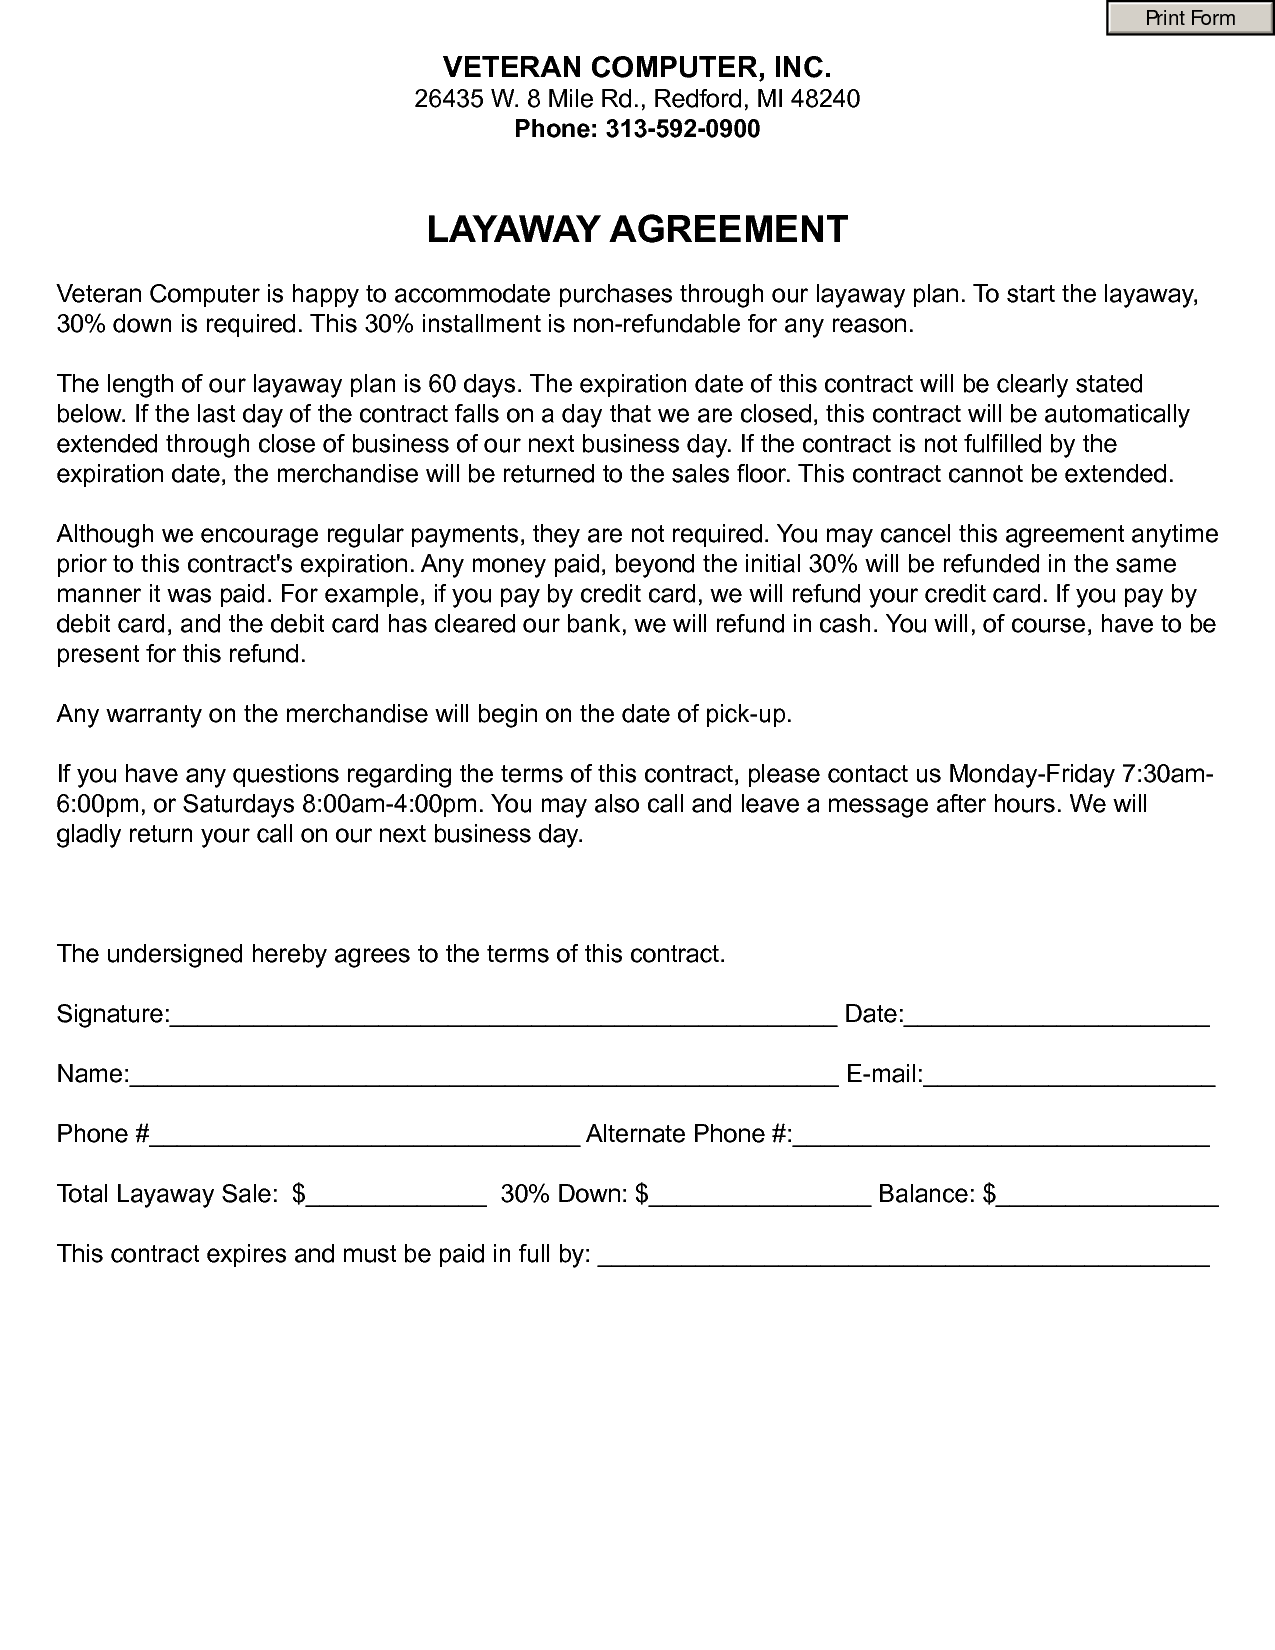 Layaway Contract Template